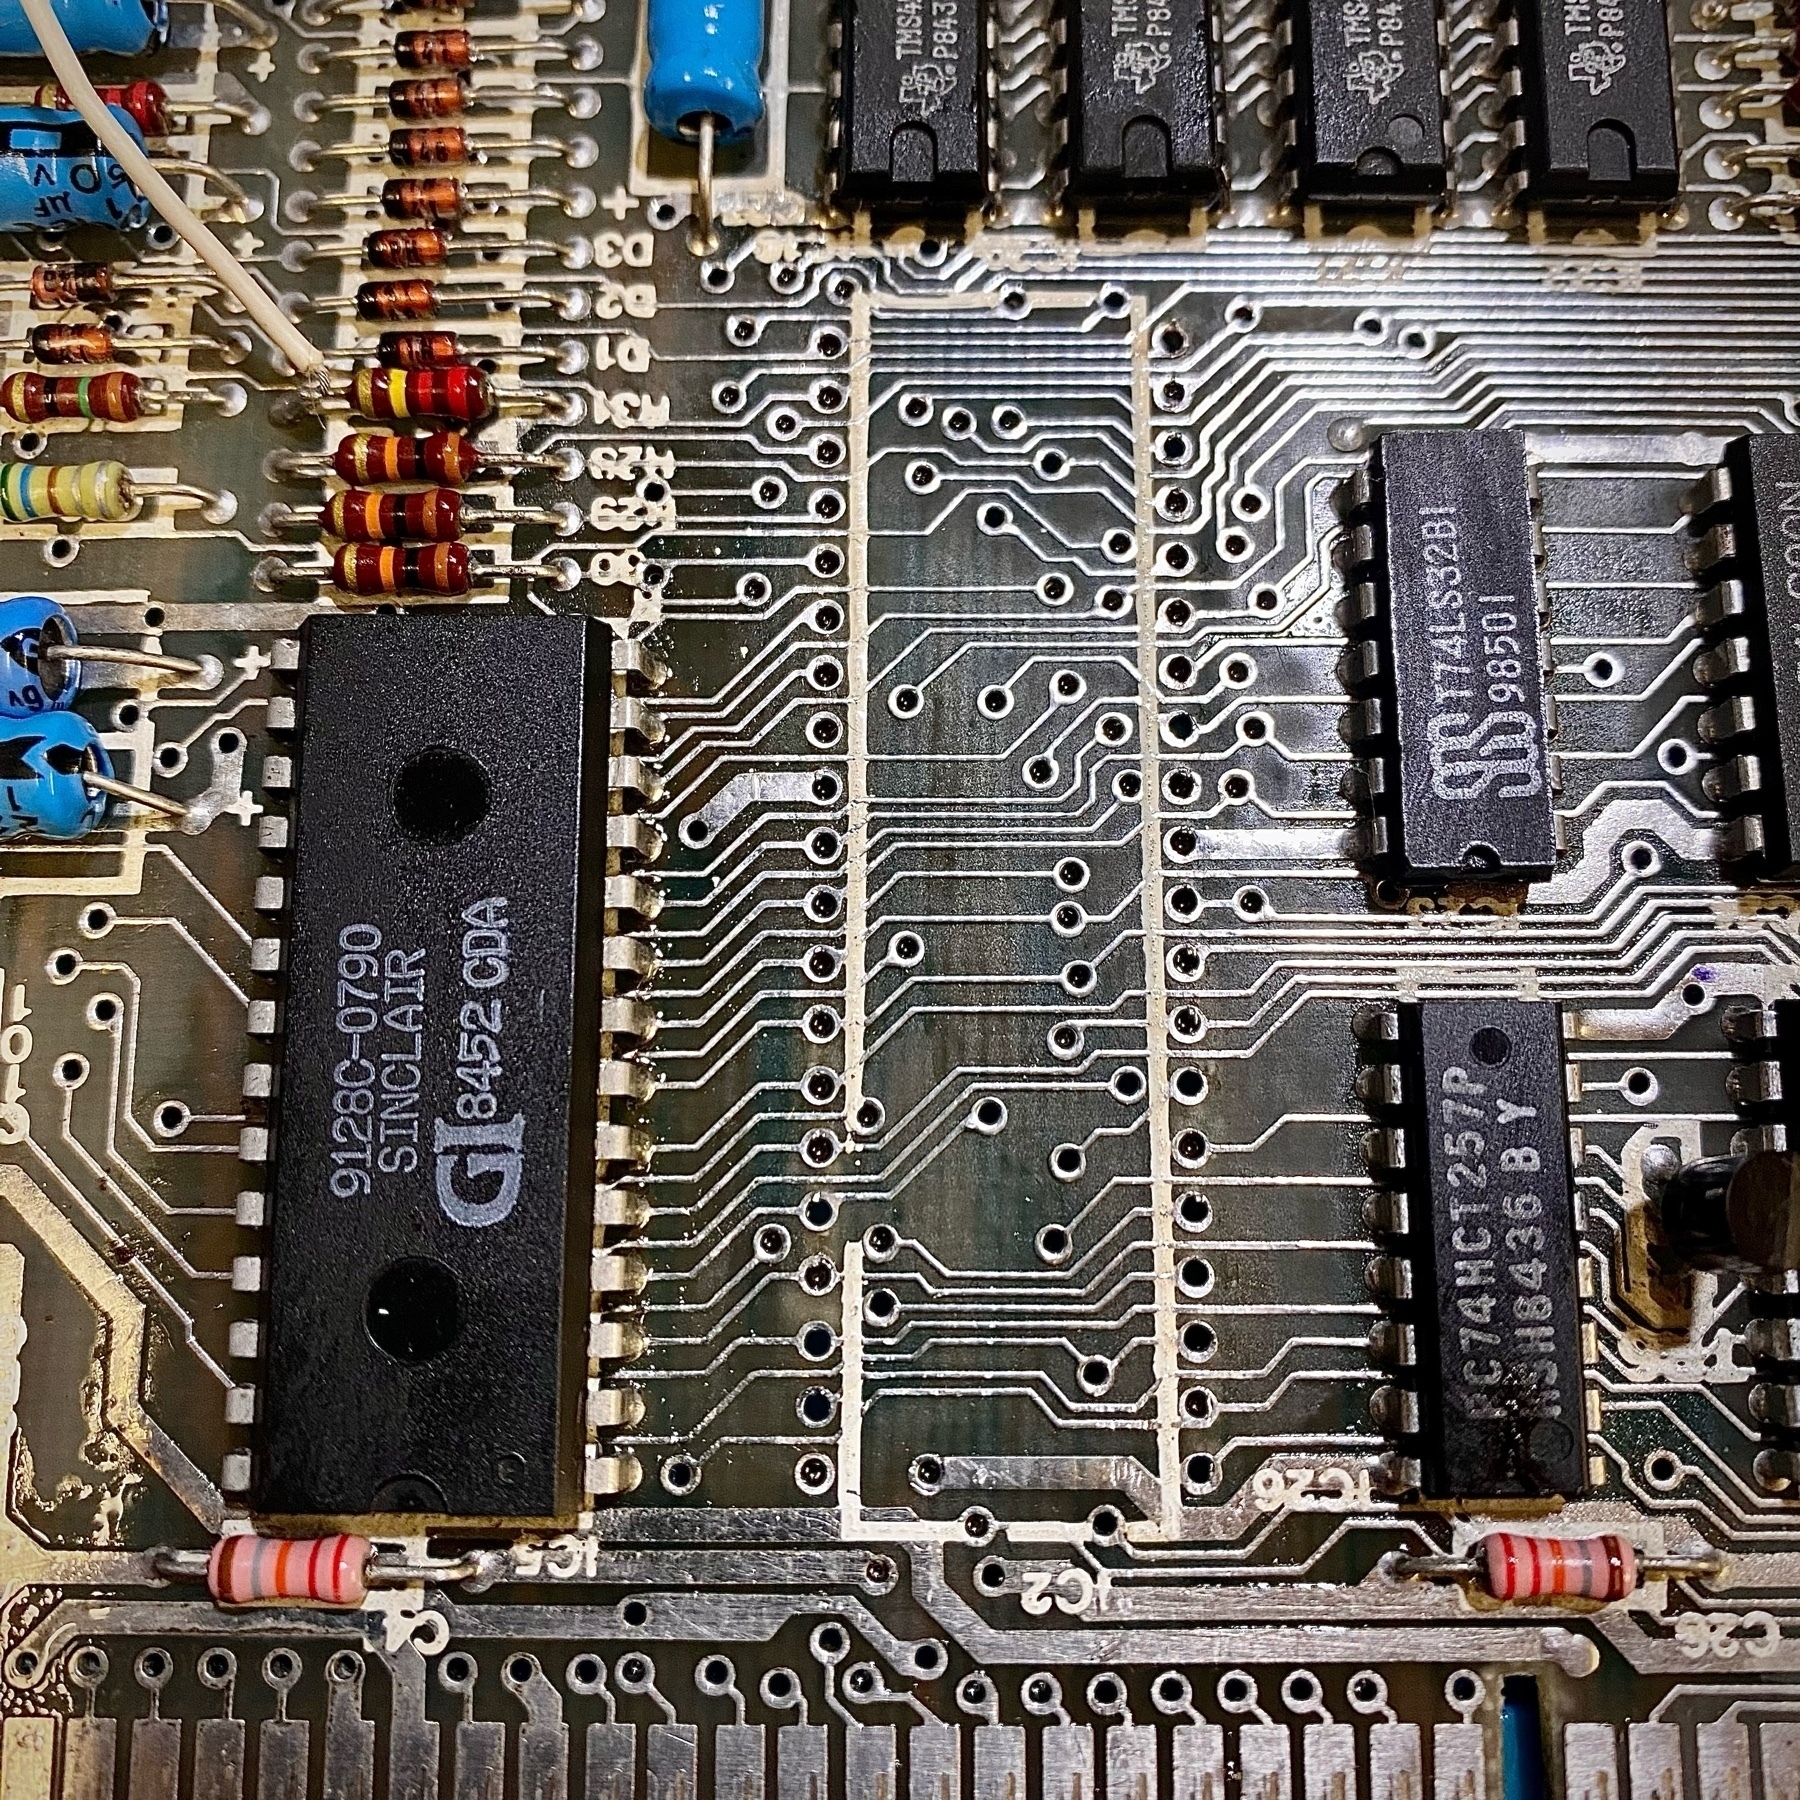 ZX Spectrum motherboard with the Z80 CPU removed